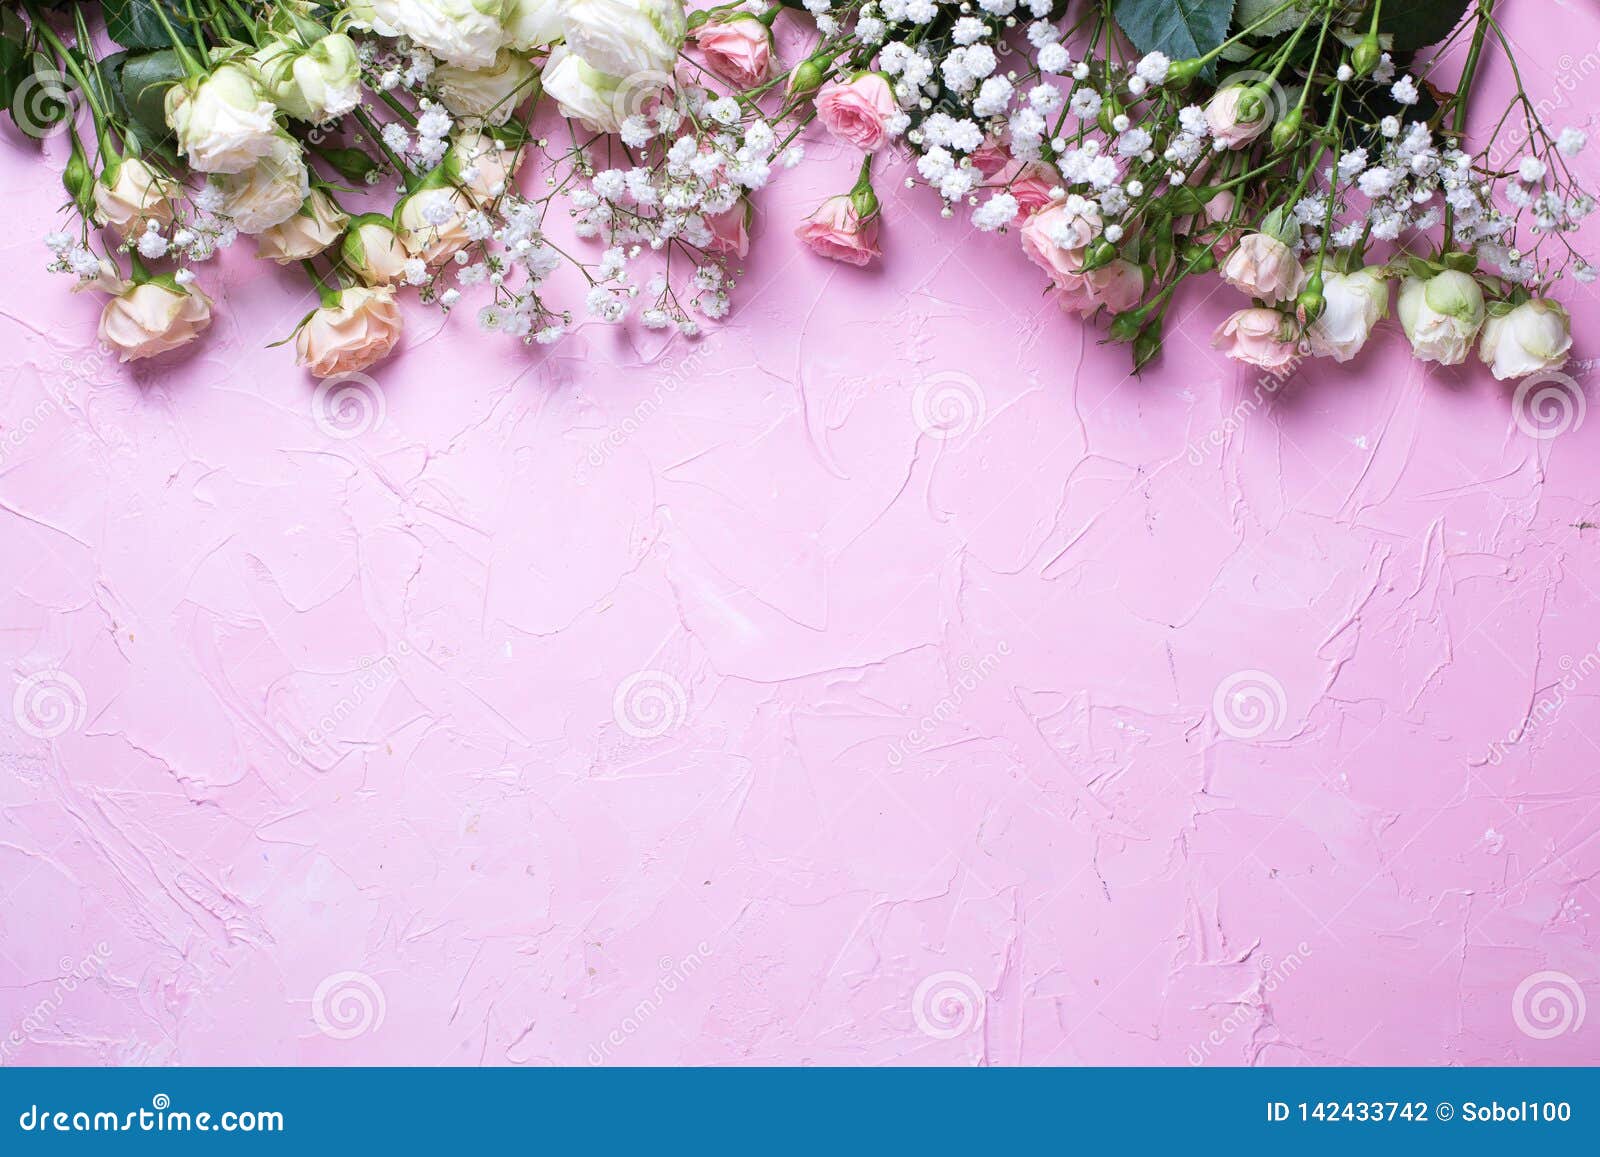 border from fresh white gypsofila and white rose flowers on  pink textured background